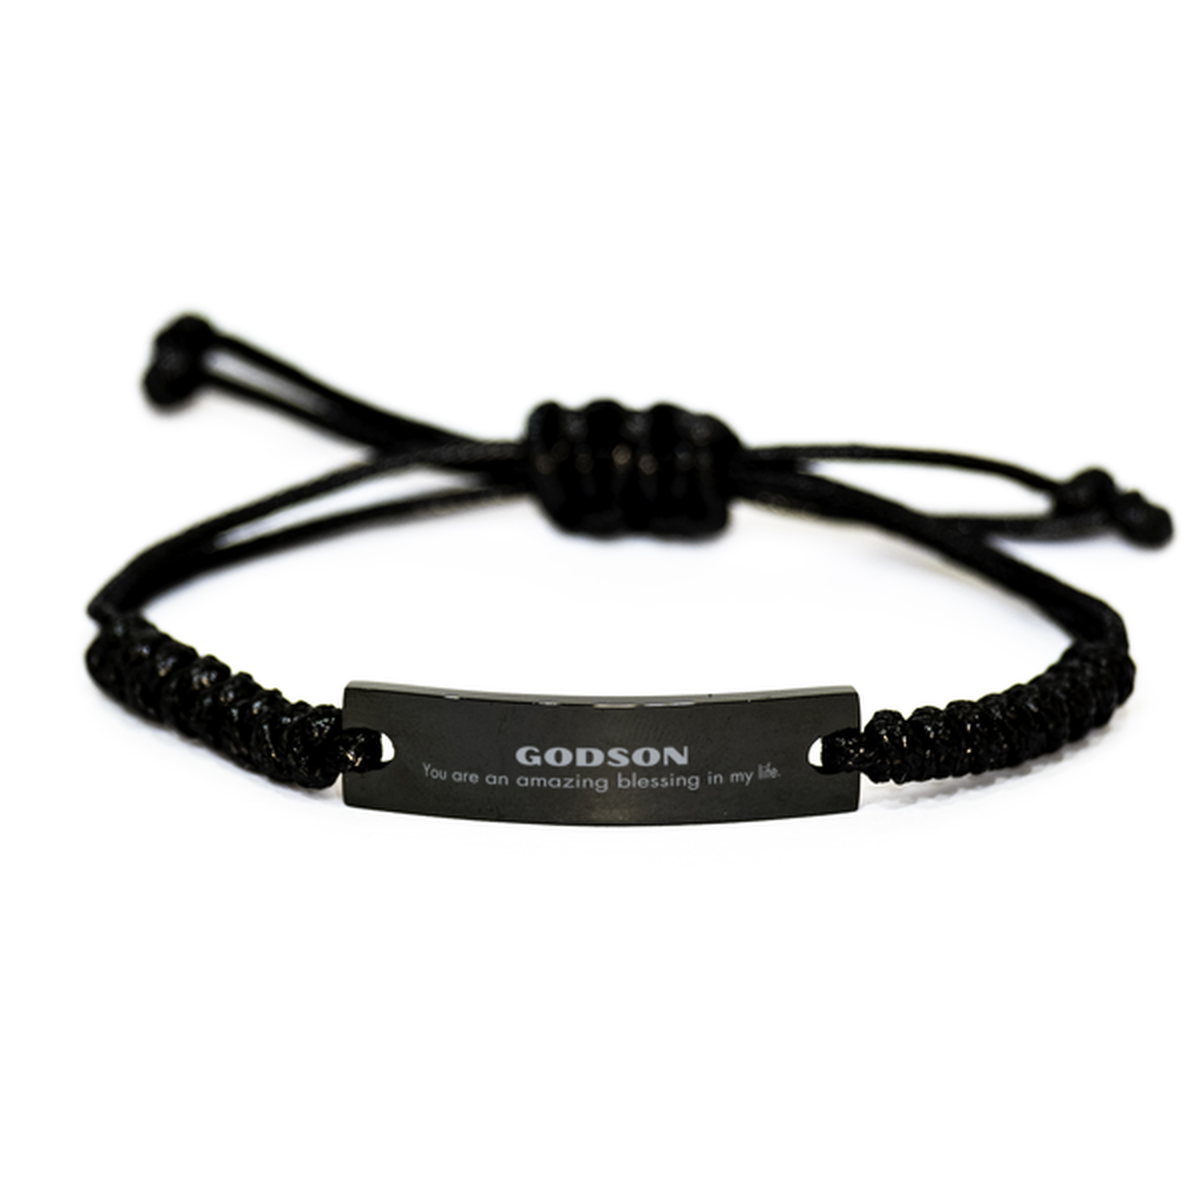 Godson Black Rope Bracelet, You are an amazing blessing in my life, Thank You Gifts For Godson, Inspirational Birthday Christmas Unique Gifts For Godson